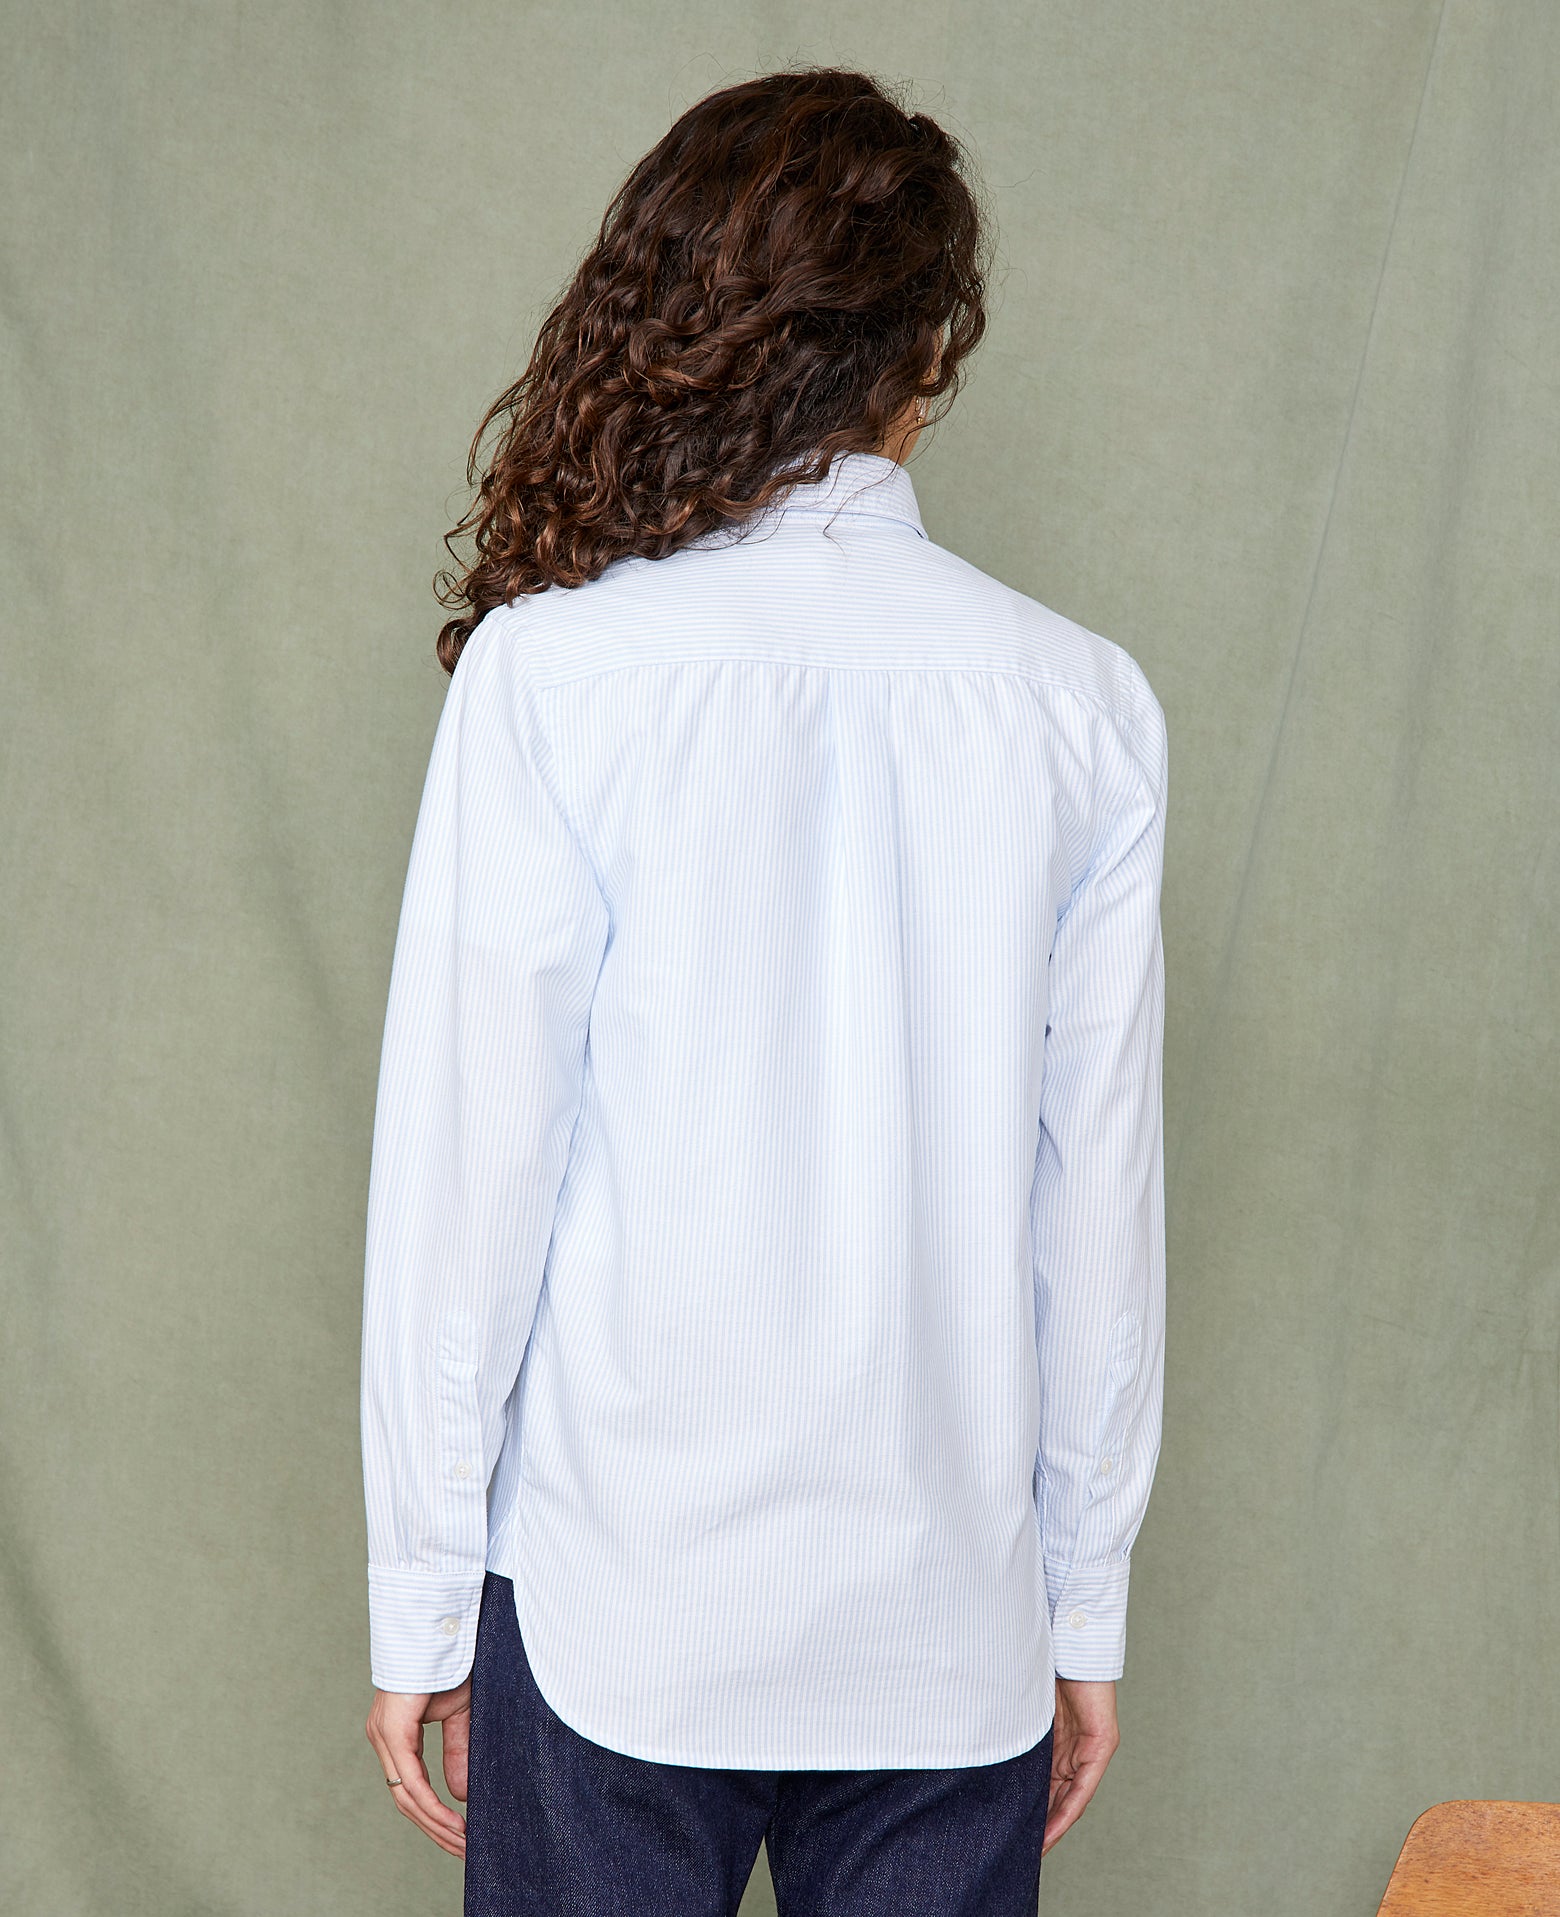 New button down shirt - Image 6